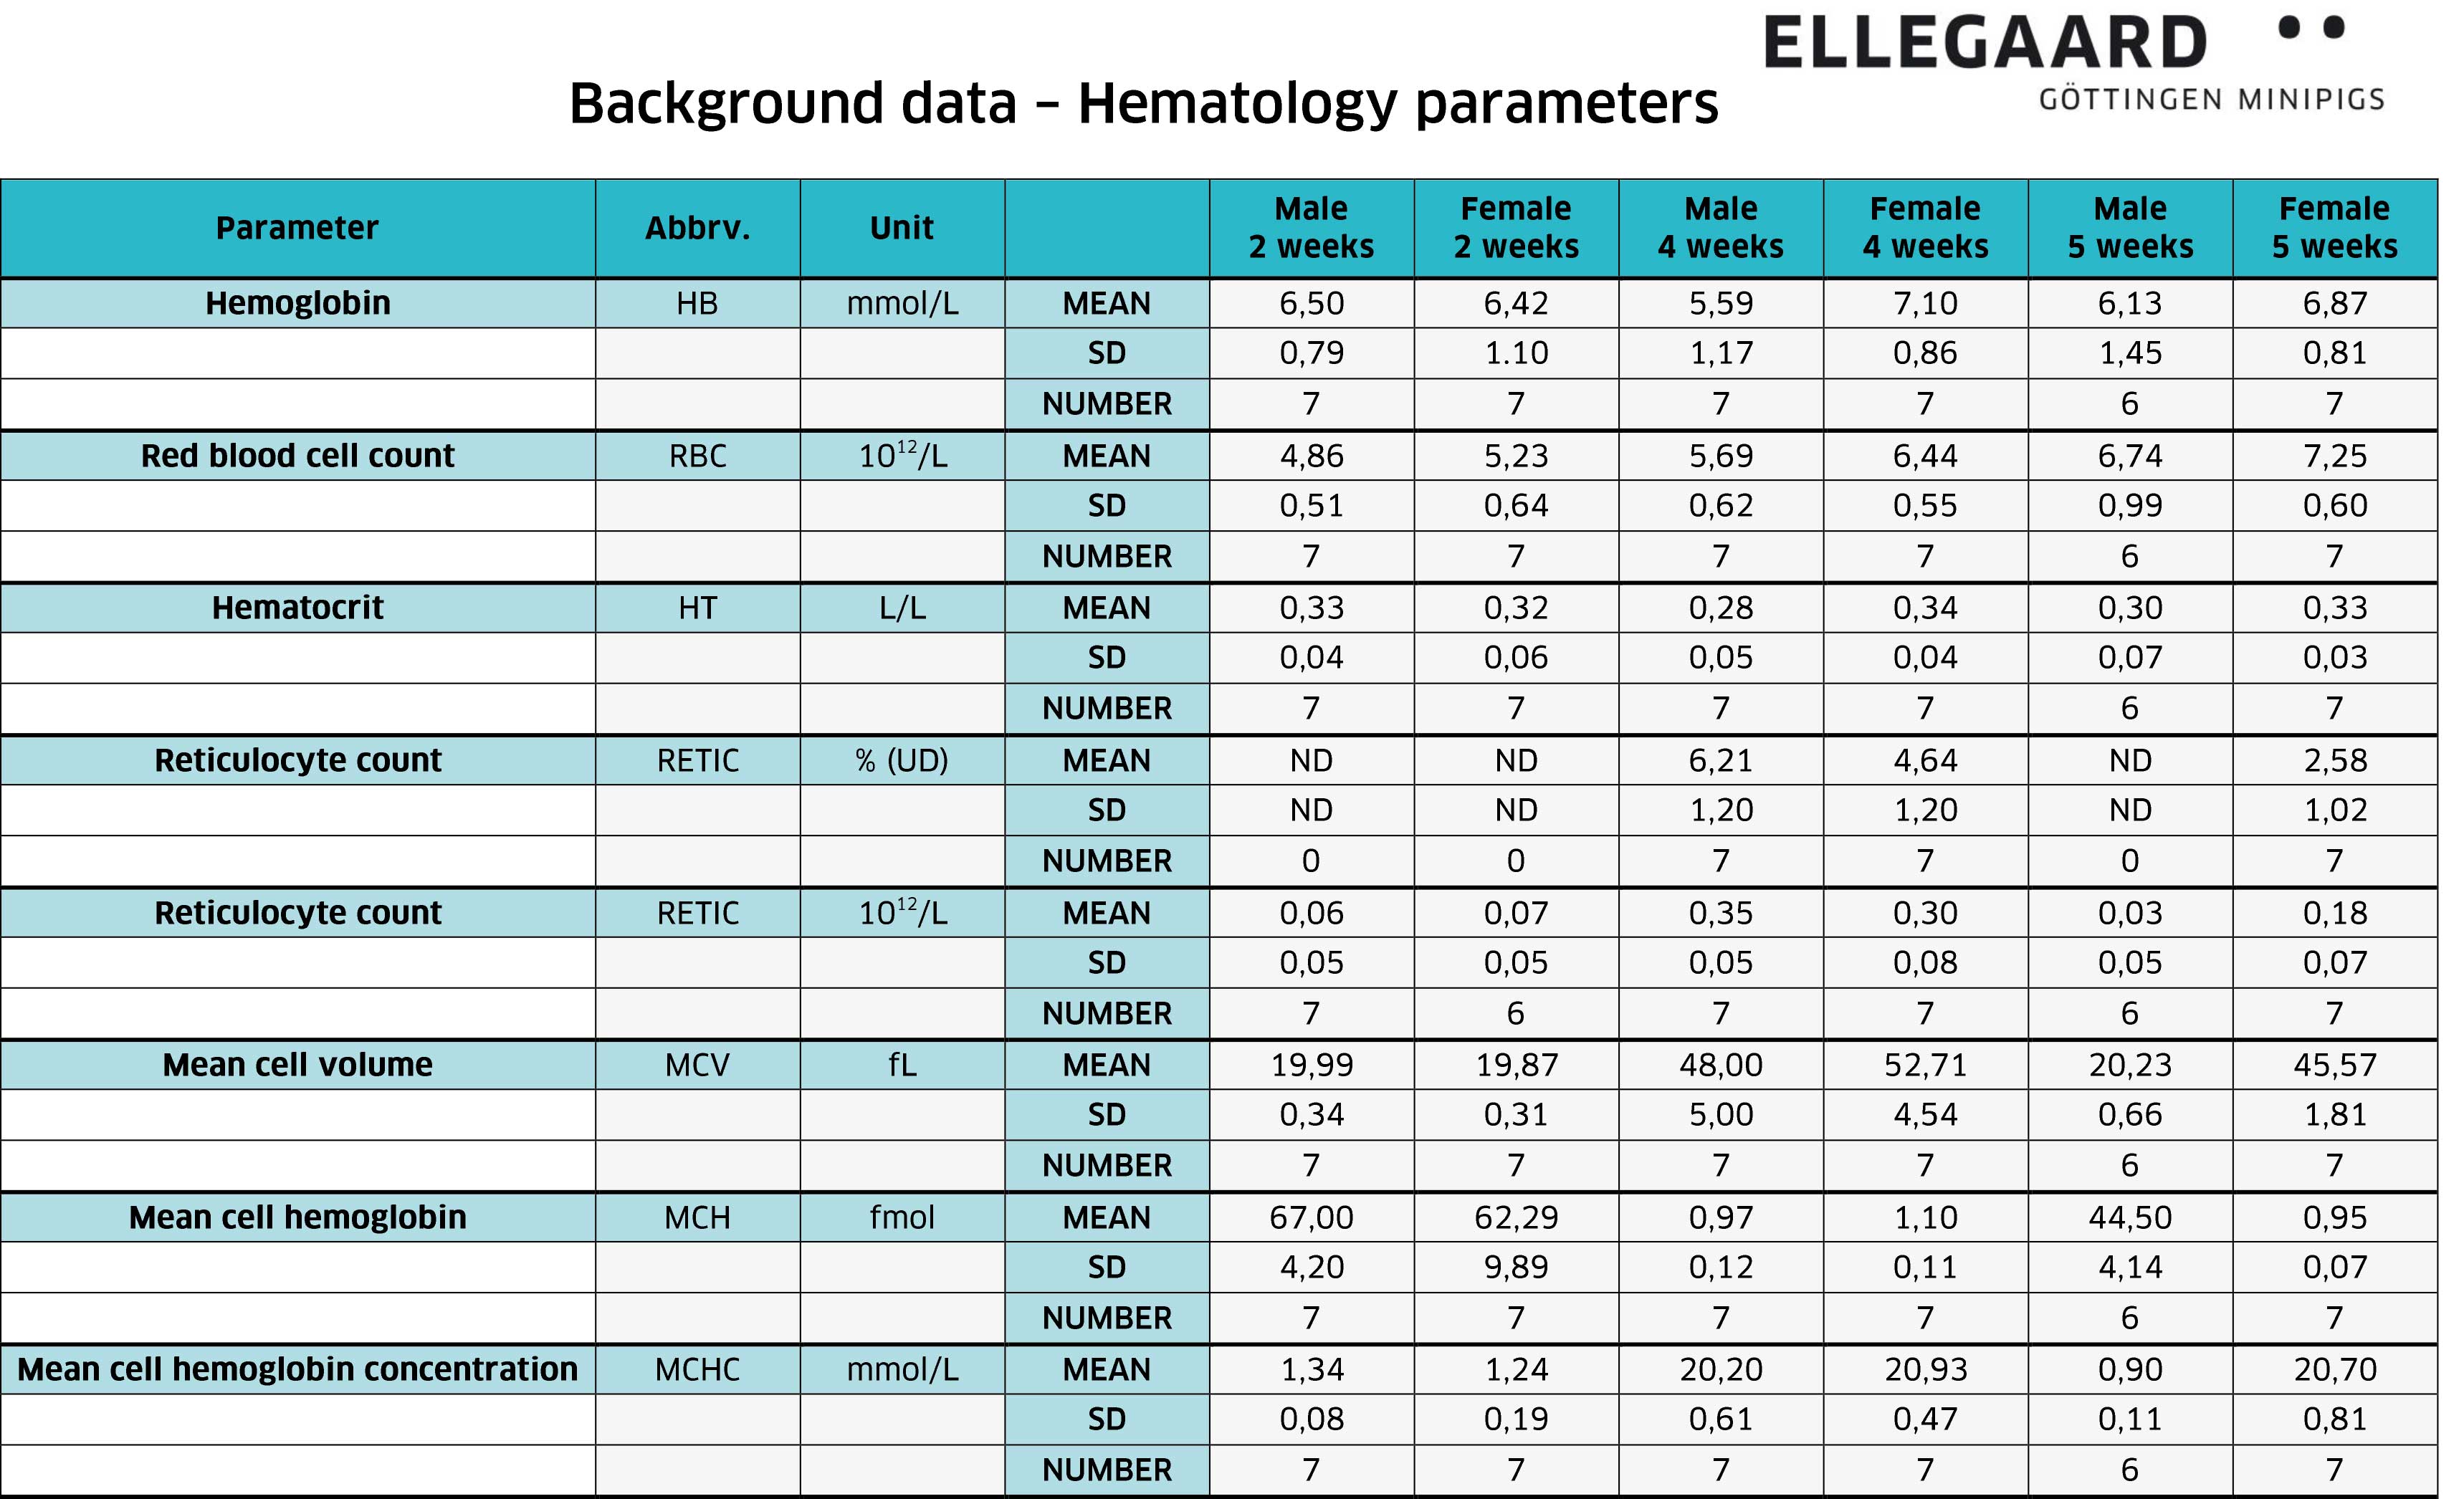 Hematology: Parameters for piglets